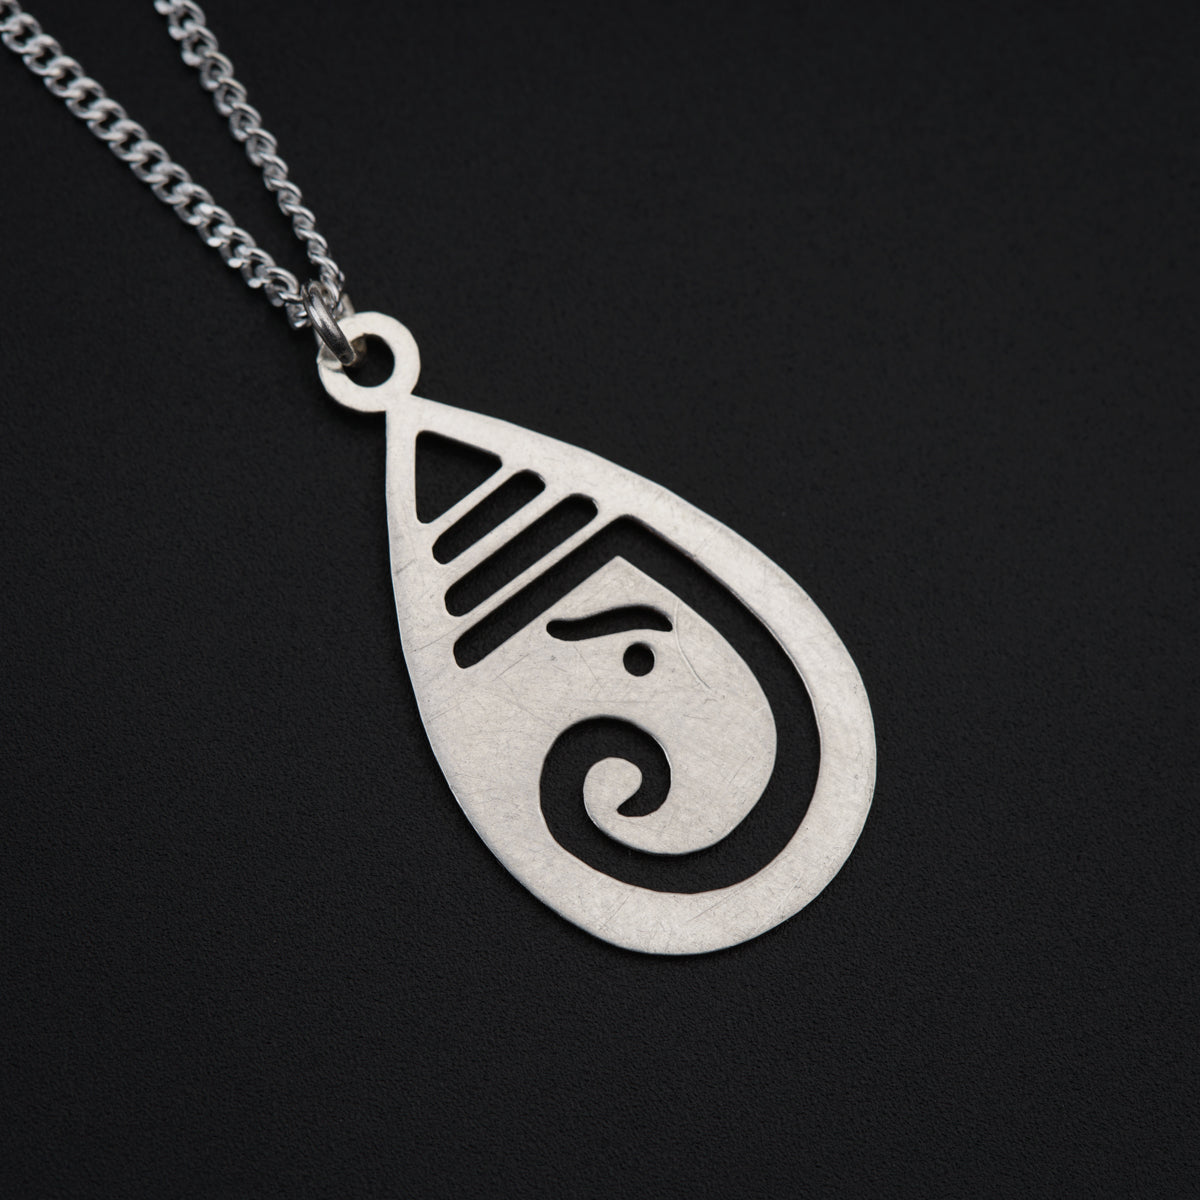 a silver necklace with a black and white design on it